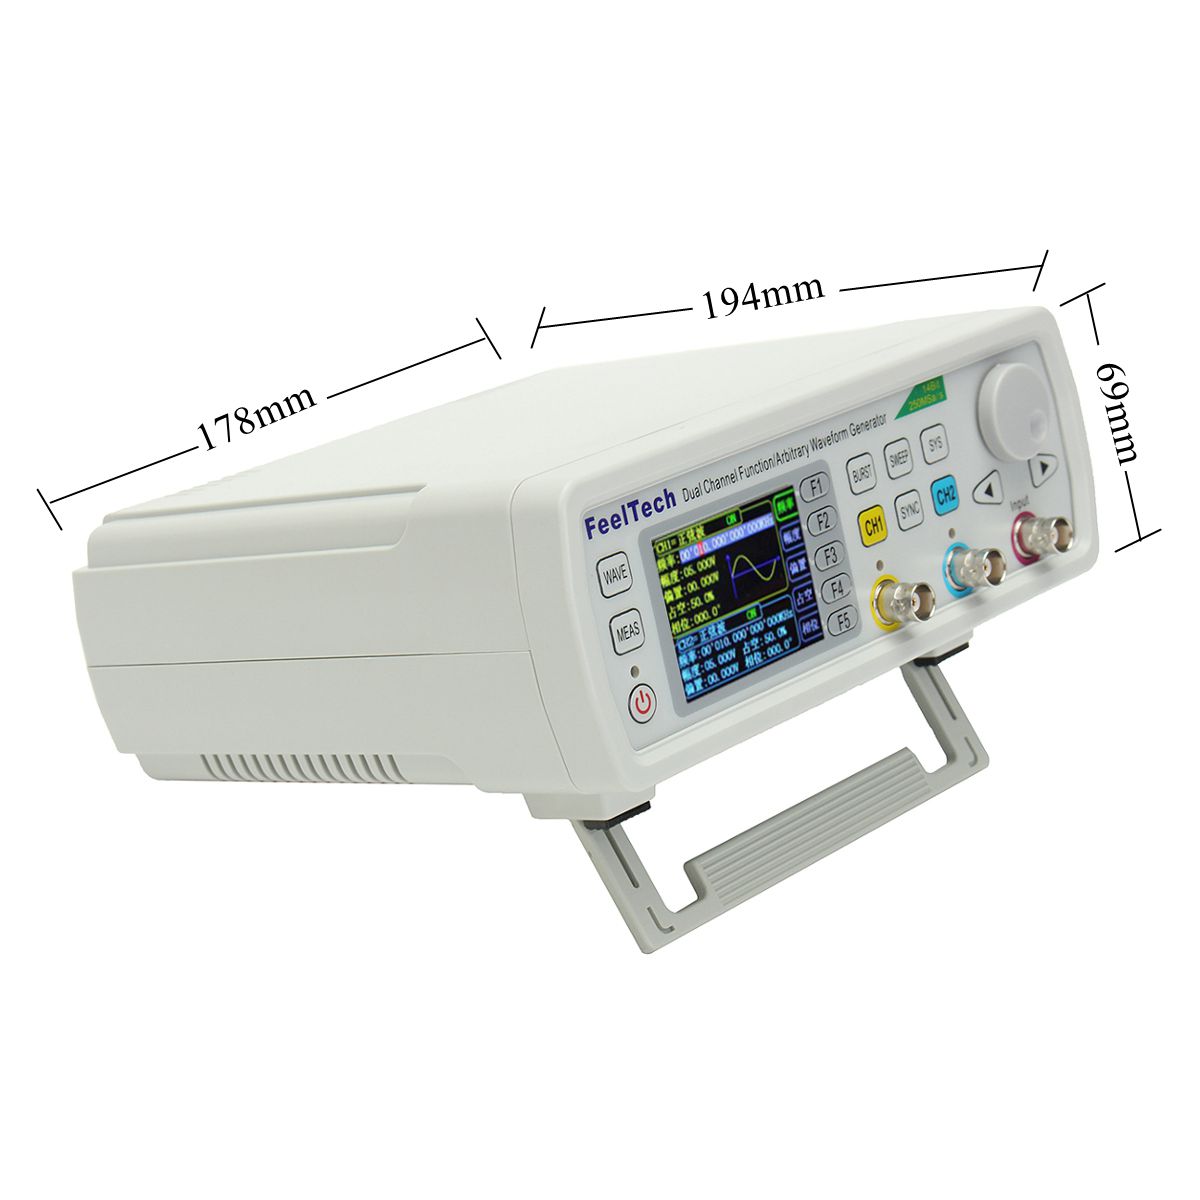 FY6600 Digital 12-60MHz Dual Channel DDS Function Arbitrary Waveform Signal Generator Frequency Meter 45